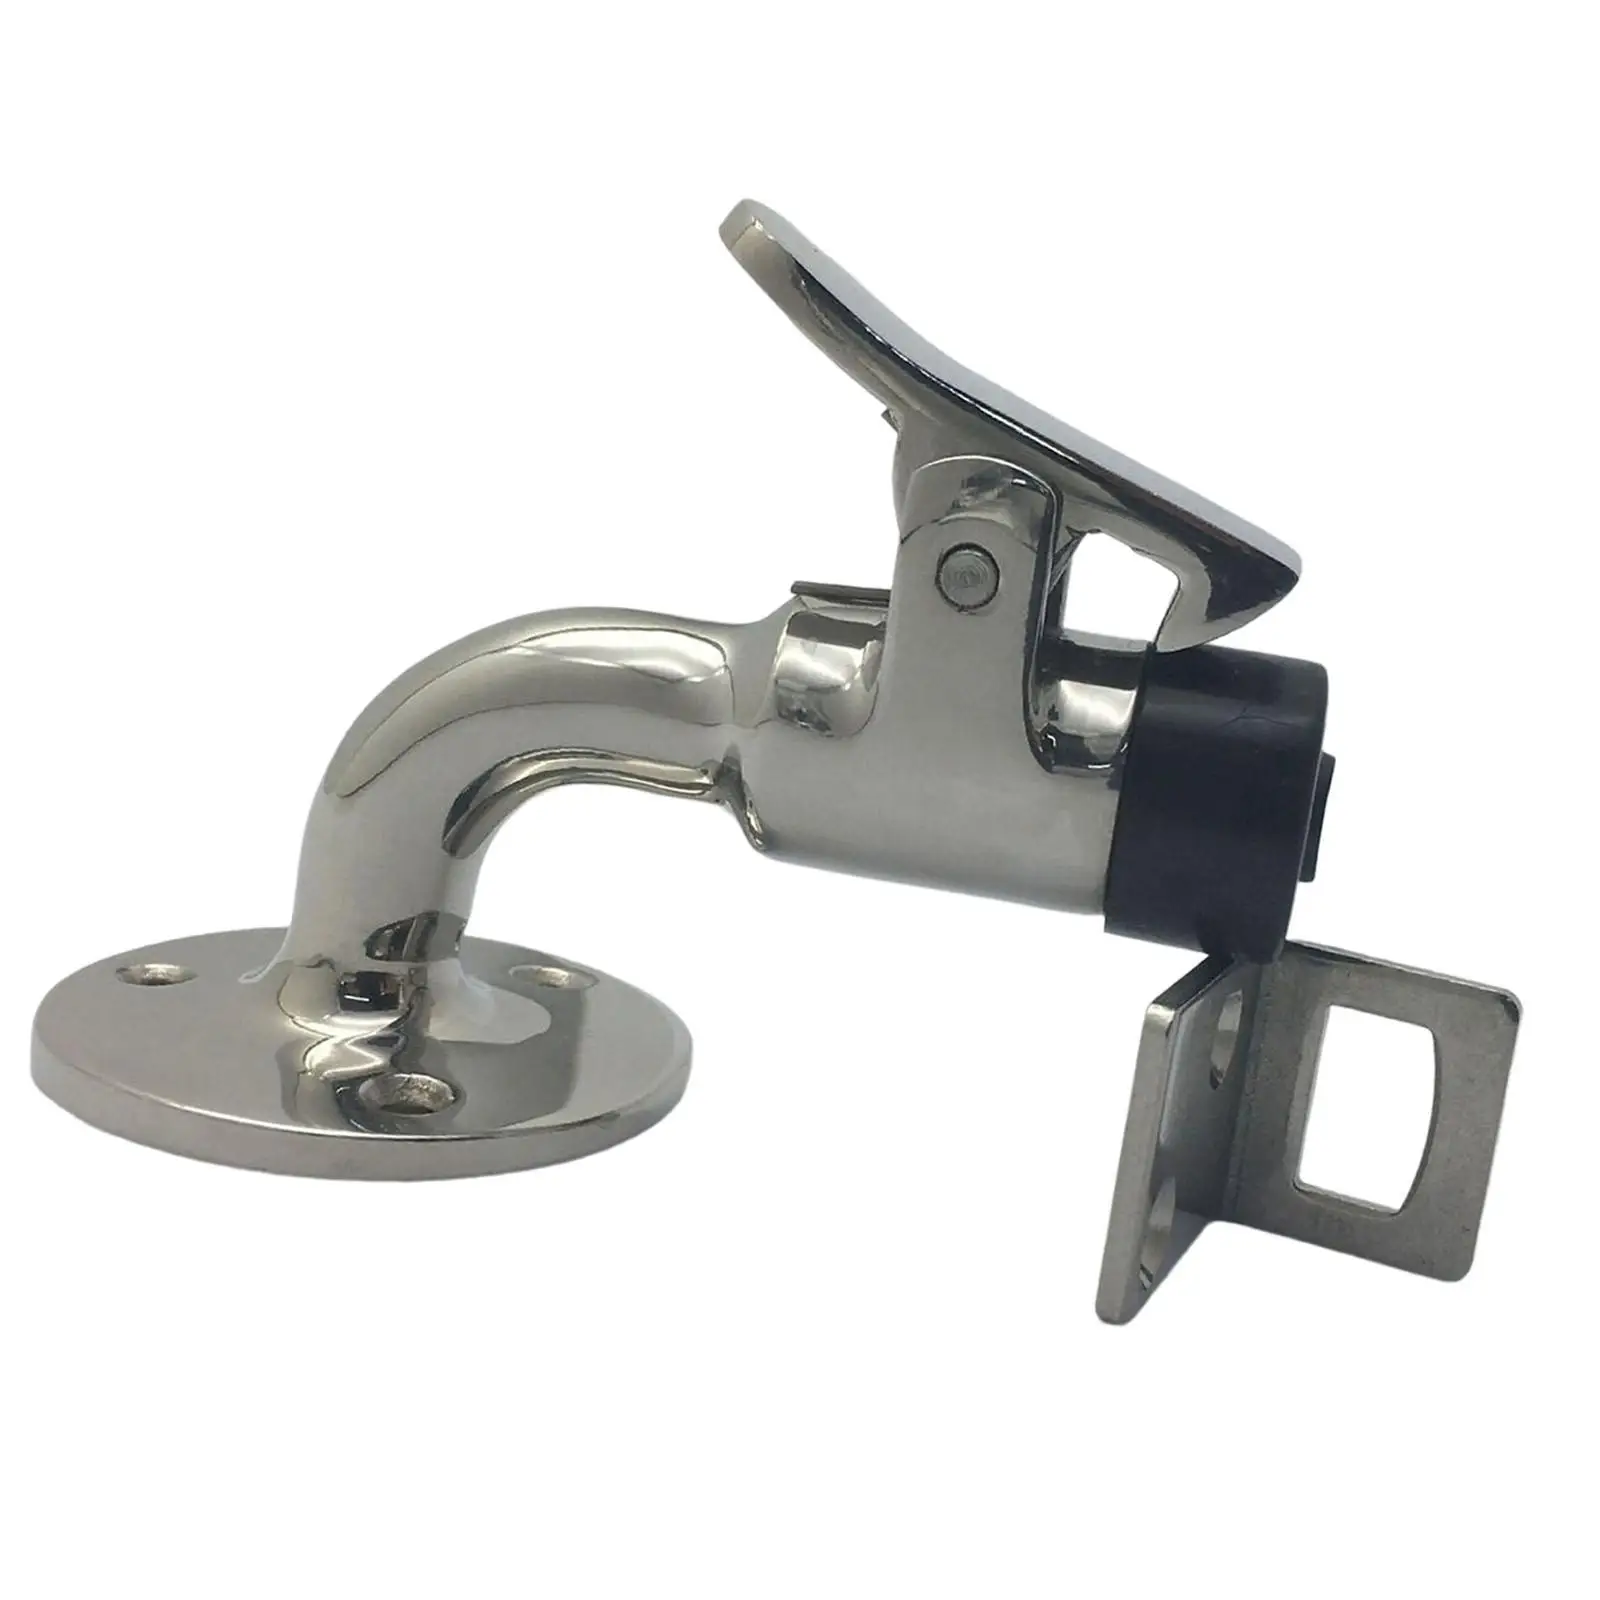 Door Stopper and 316 Stainless Steel Accessory for Marine Yacht